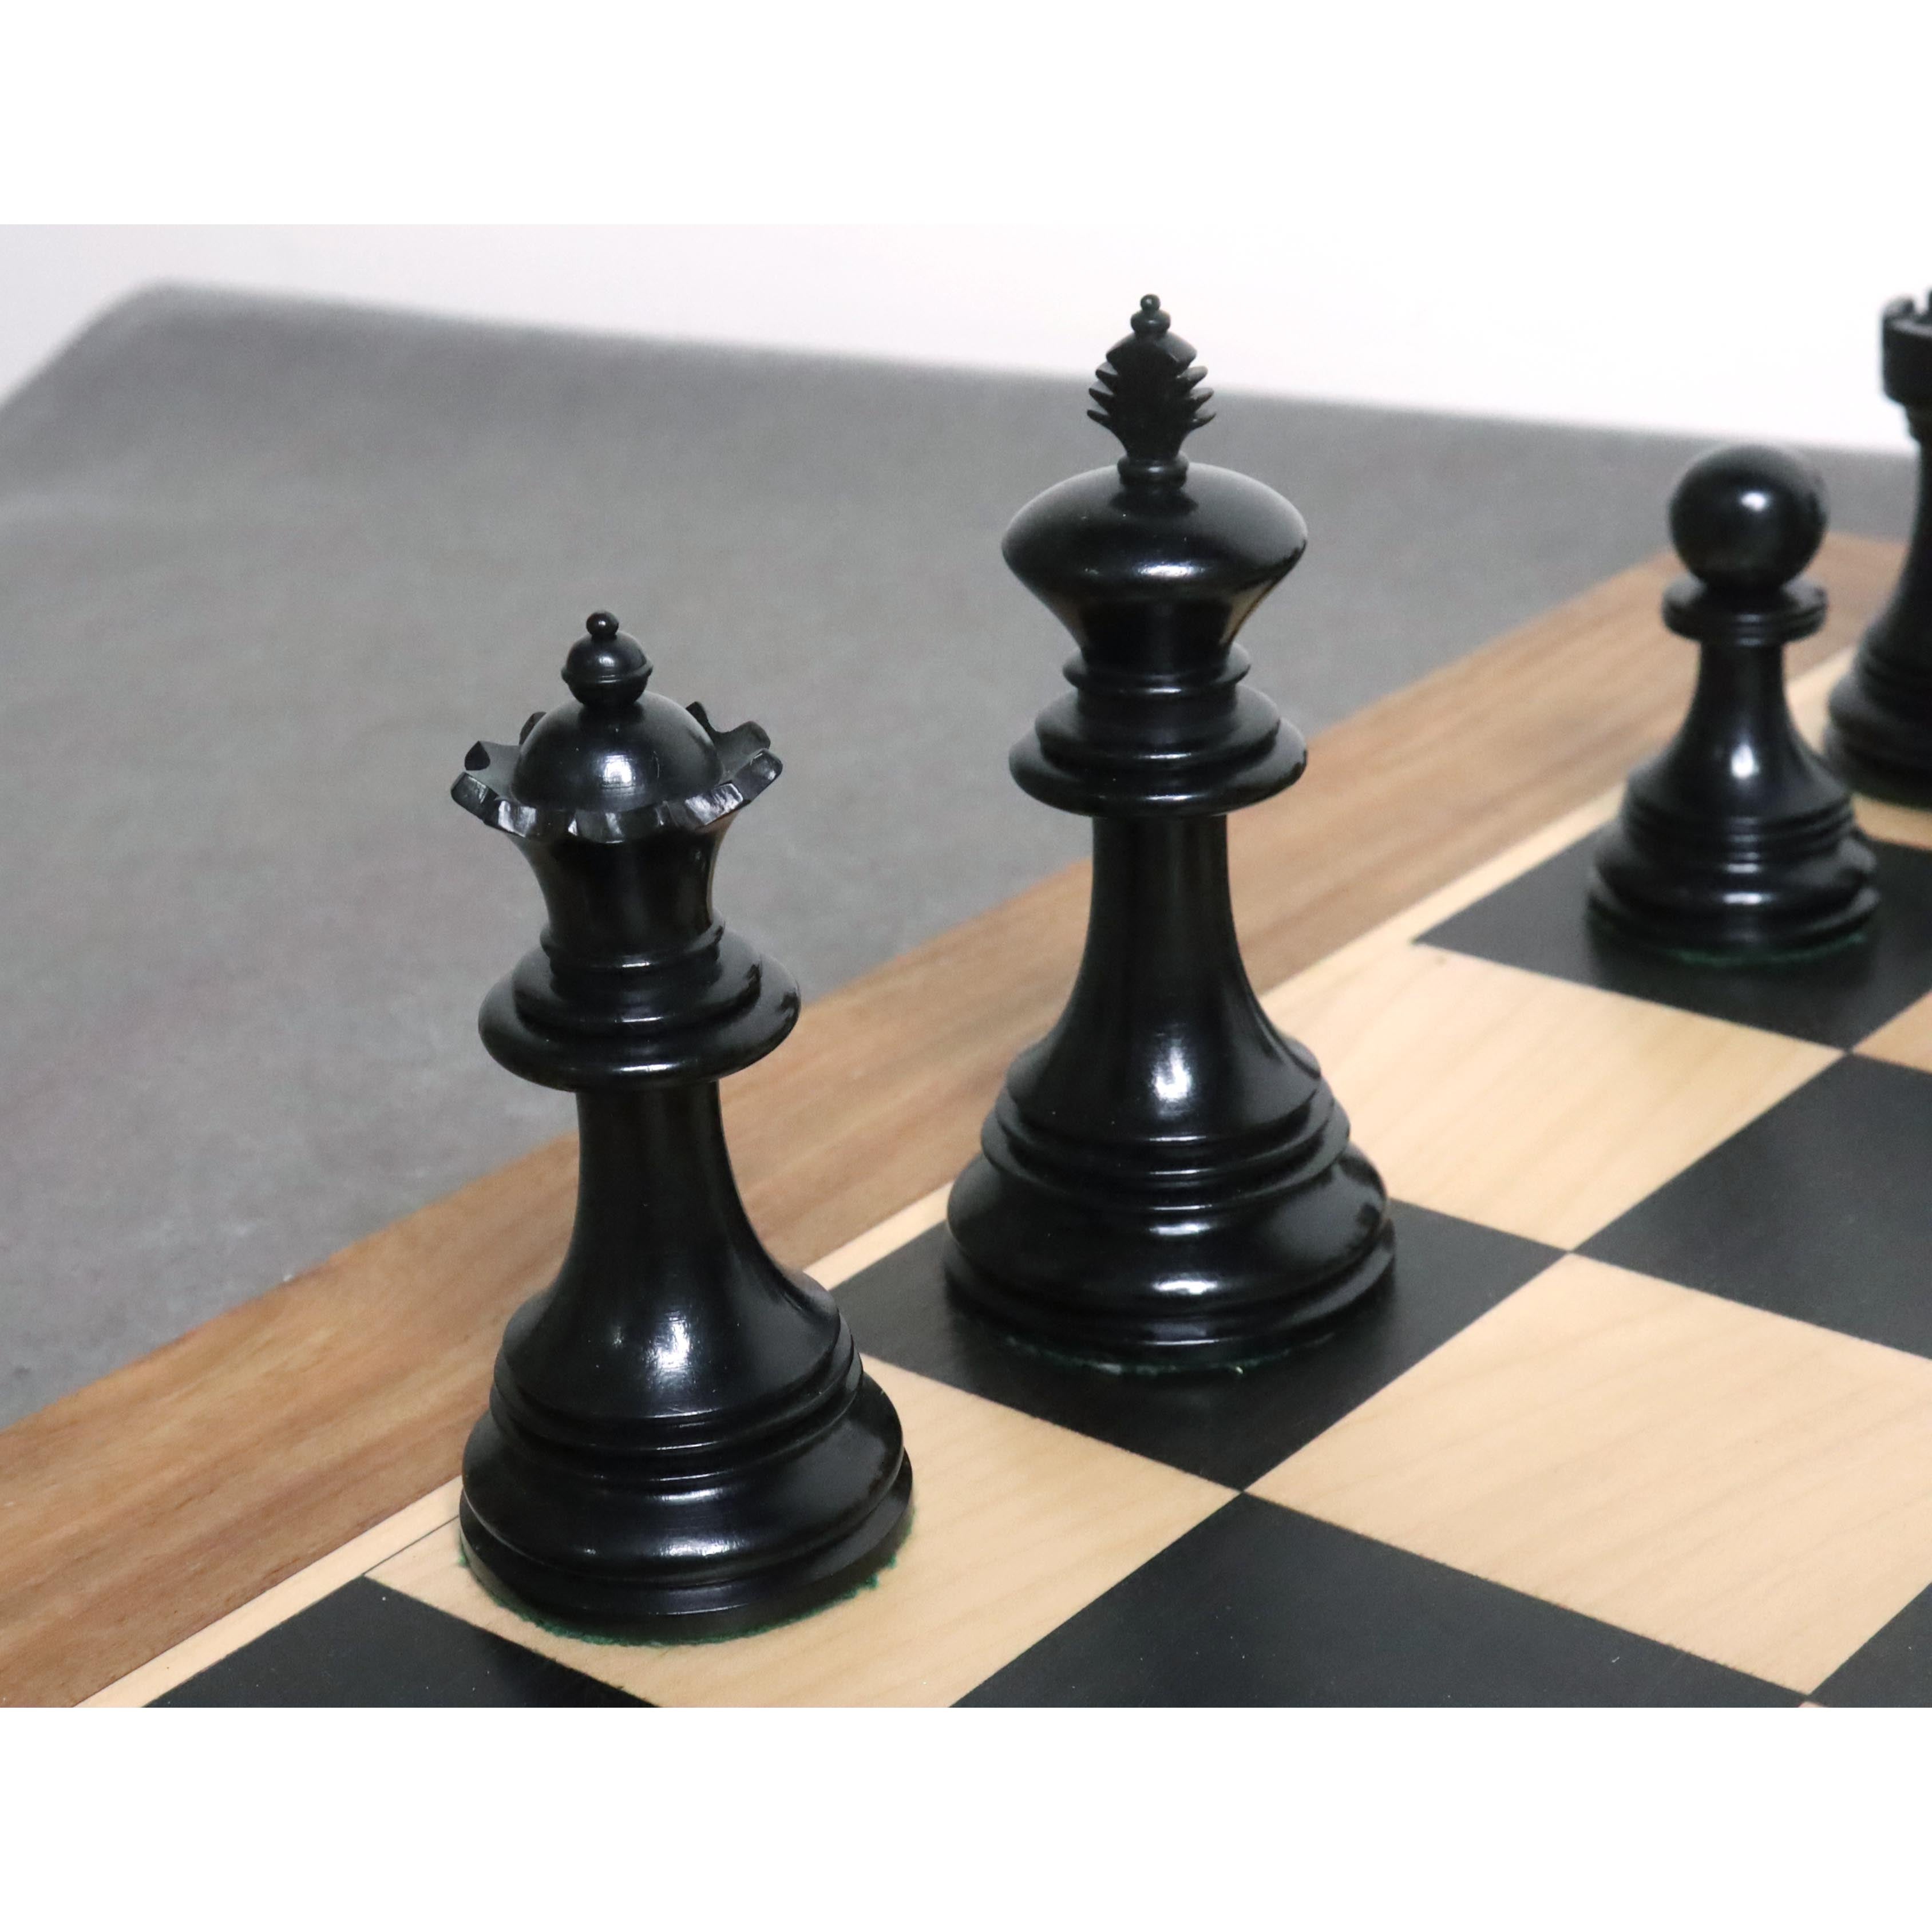 Slightly Imperfect 4.2" Luxury Patton Staunton Chess Pieces Only set - Ebony Wood - Triple Weighted